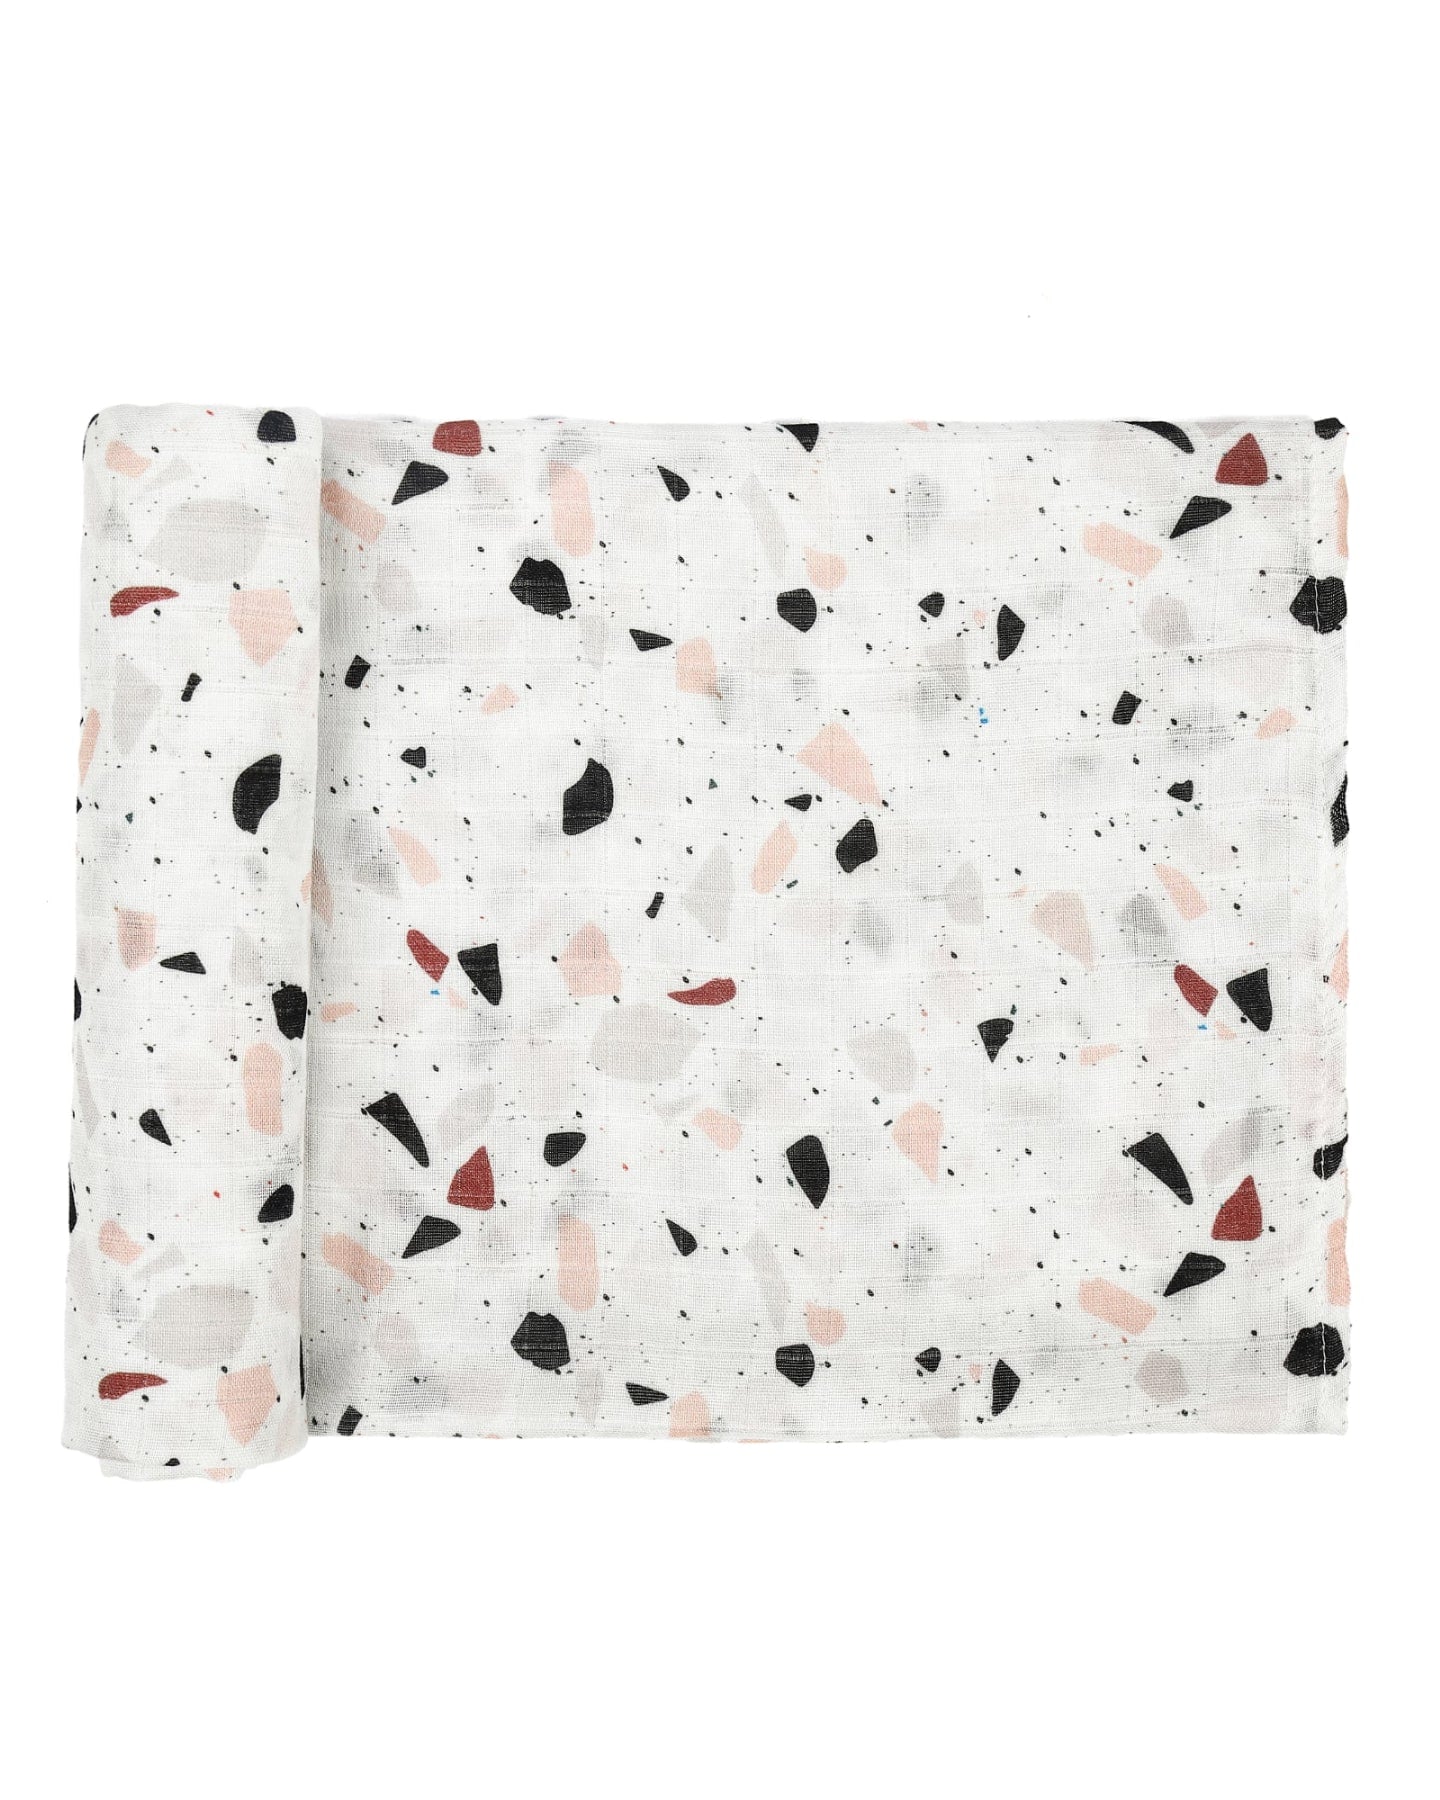 Terrazzo Swaddle - Baby Swaddles & Wraps at Louie Meets Lola